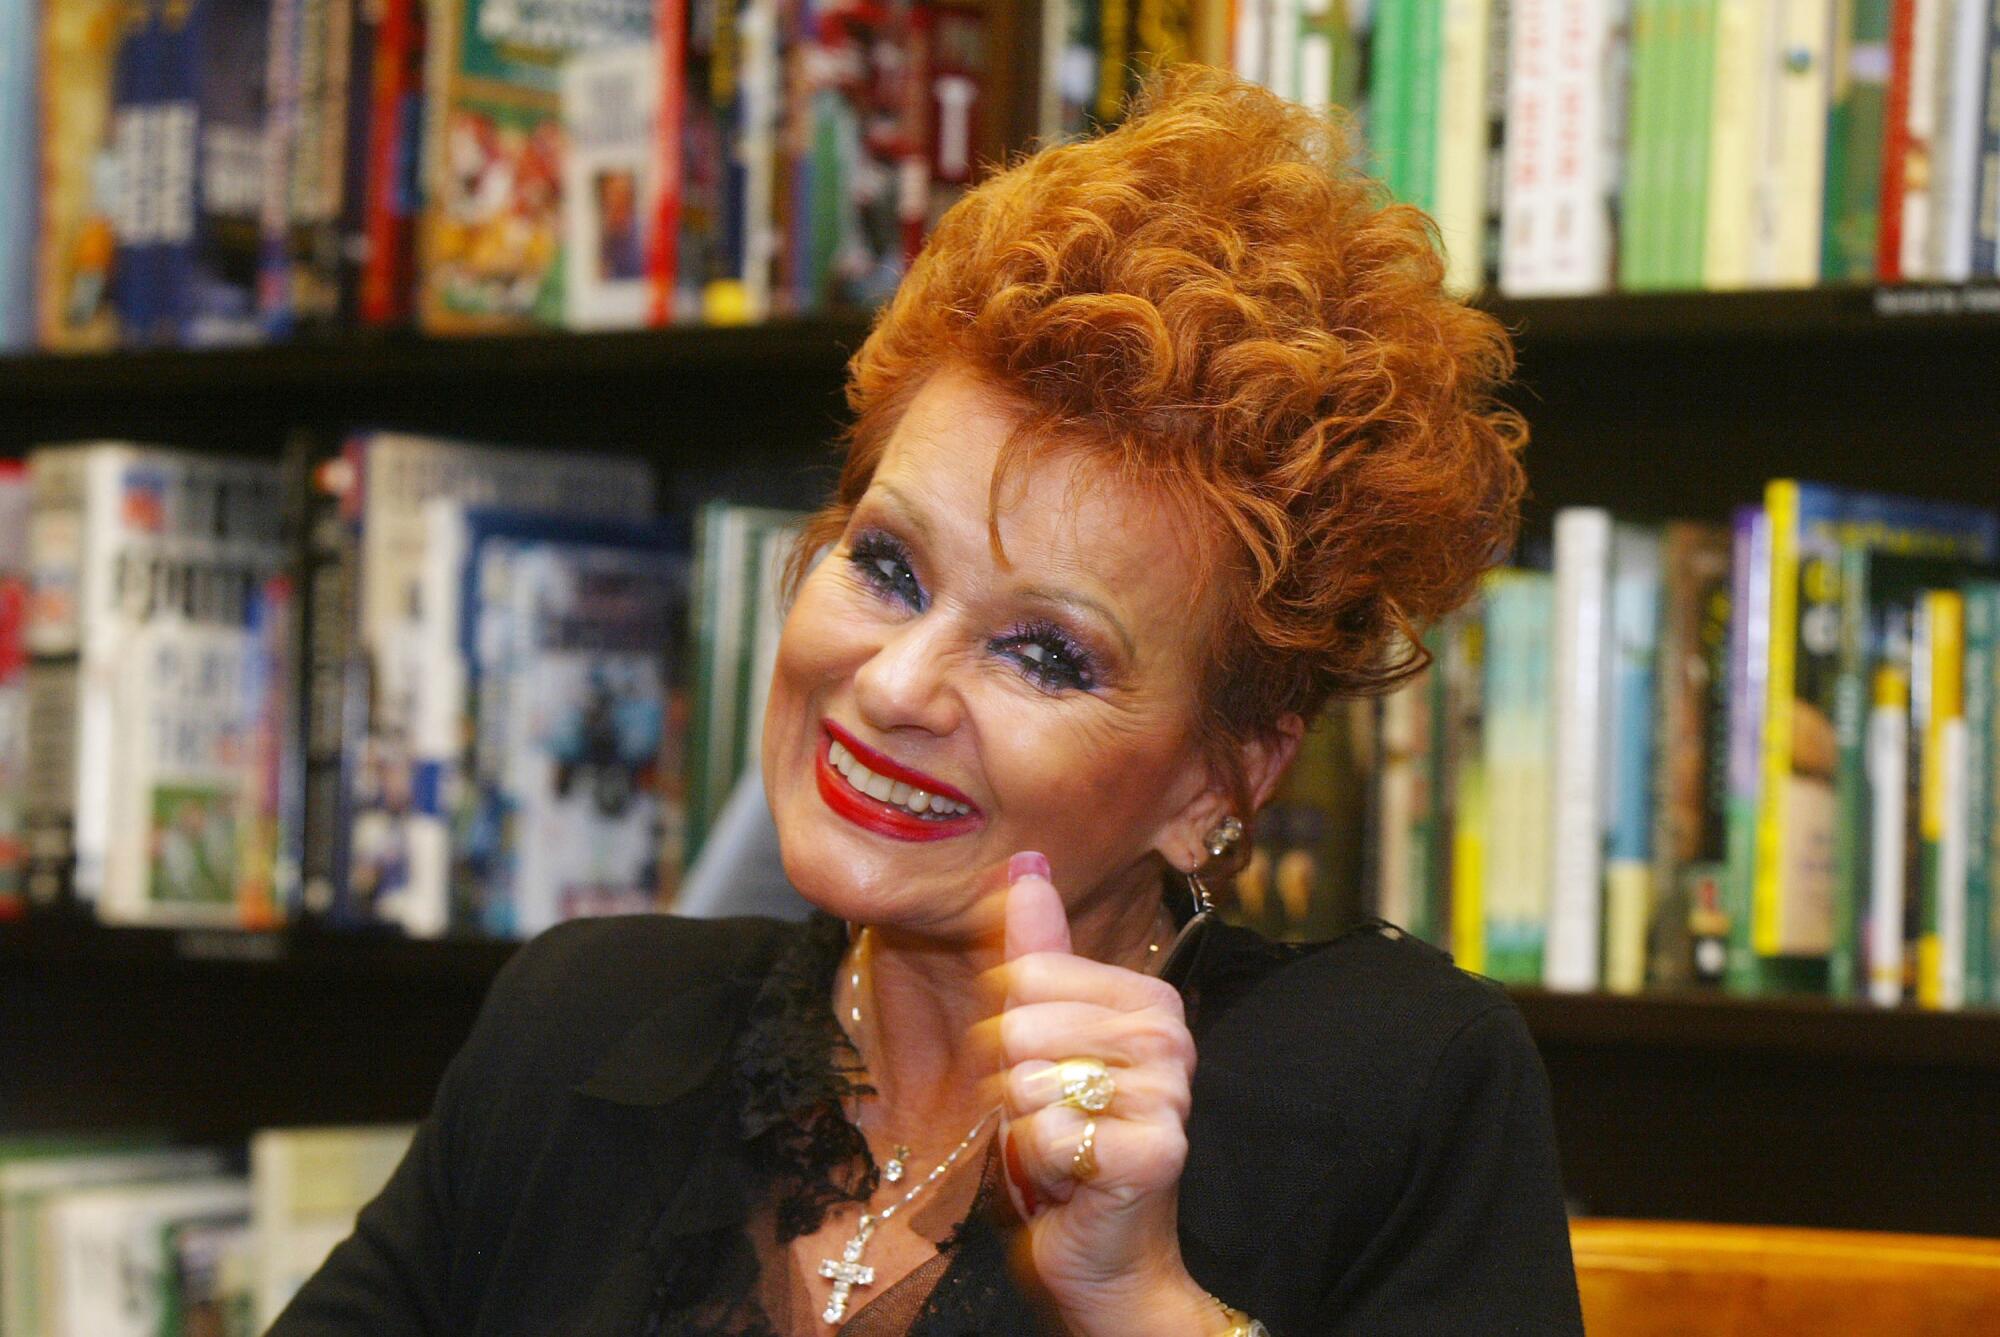 Televangelist Tammy Faye Bakker gives a thumbs up